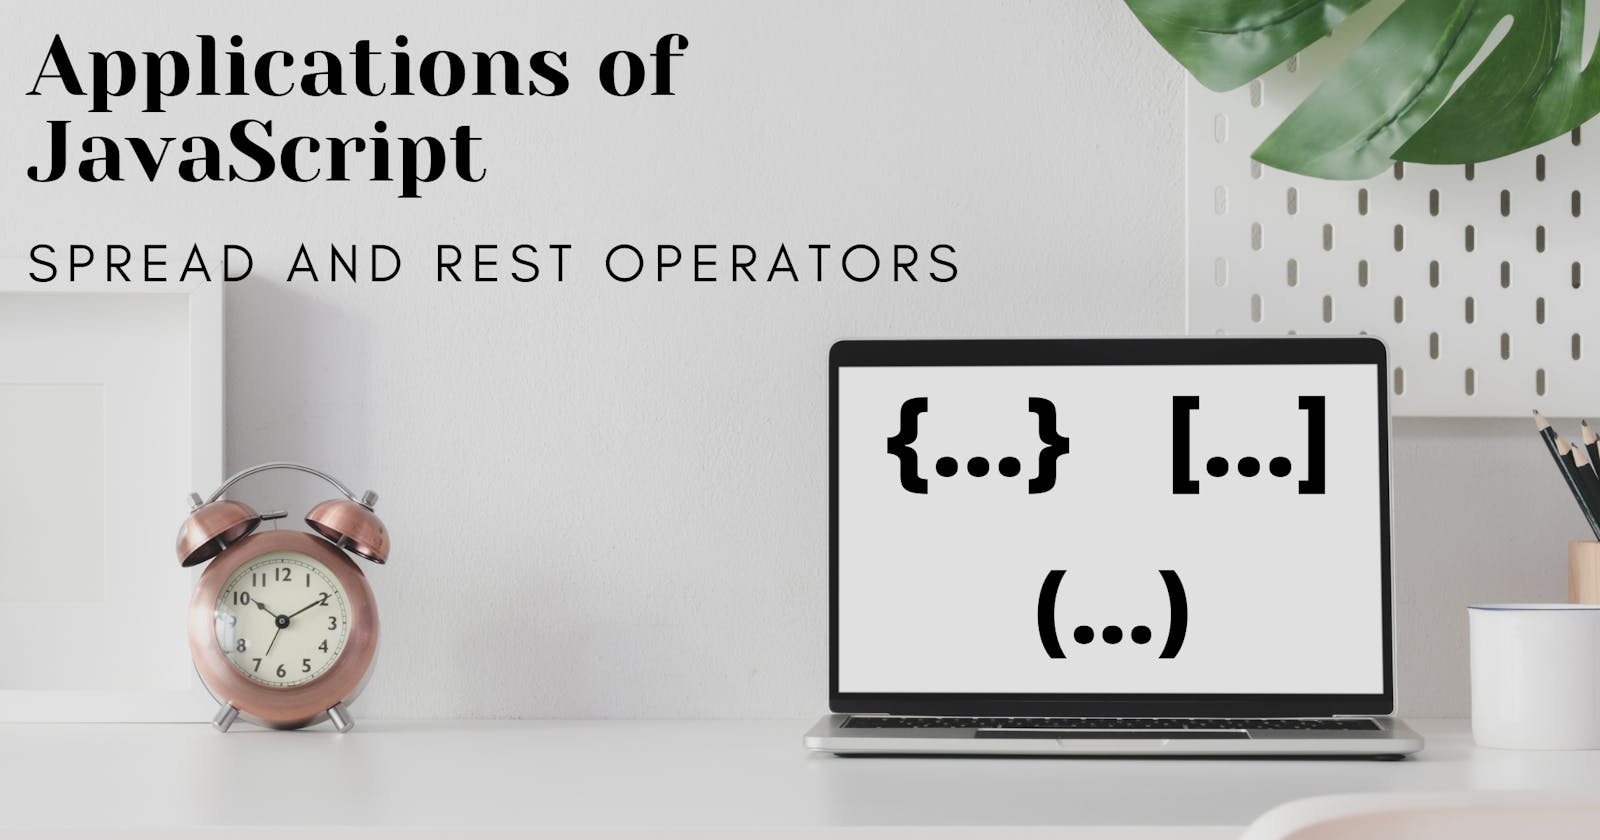 Applications of JavaScript Spread and Rest Operators